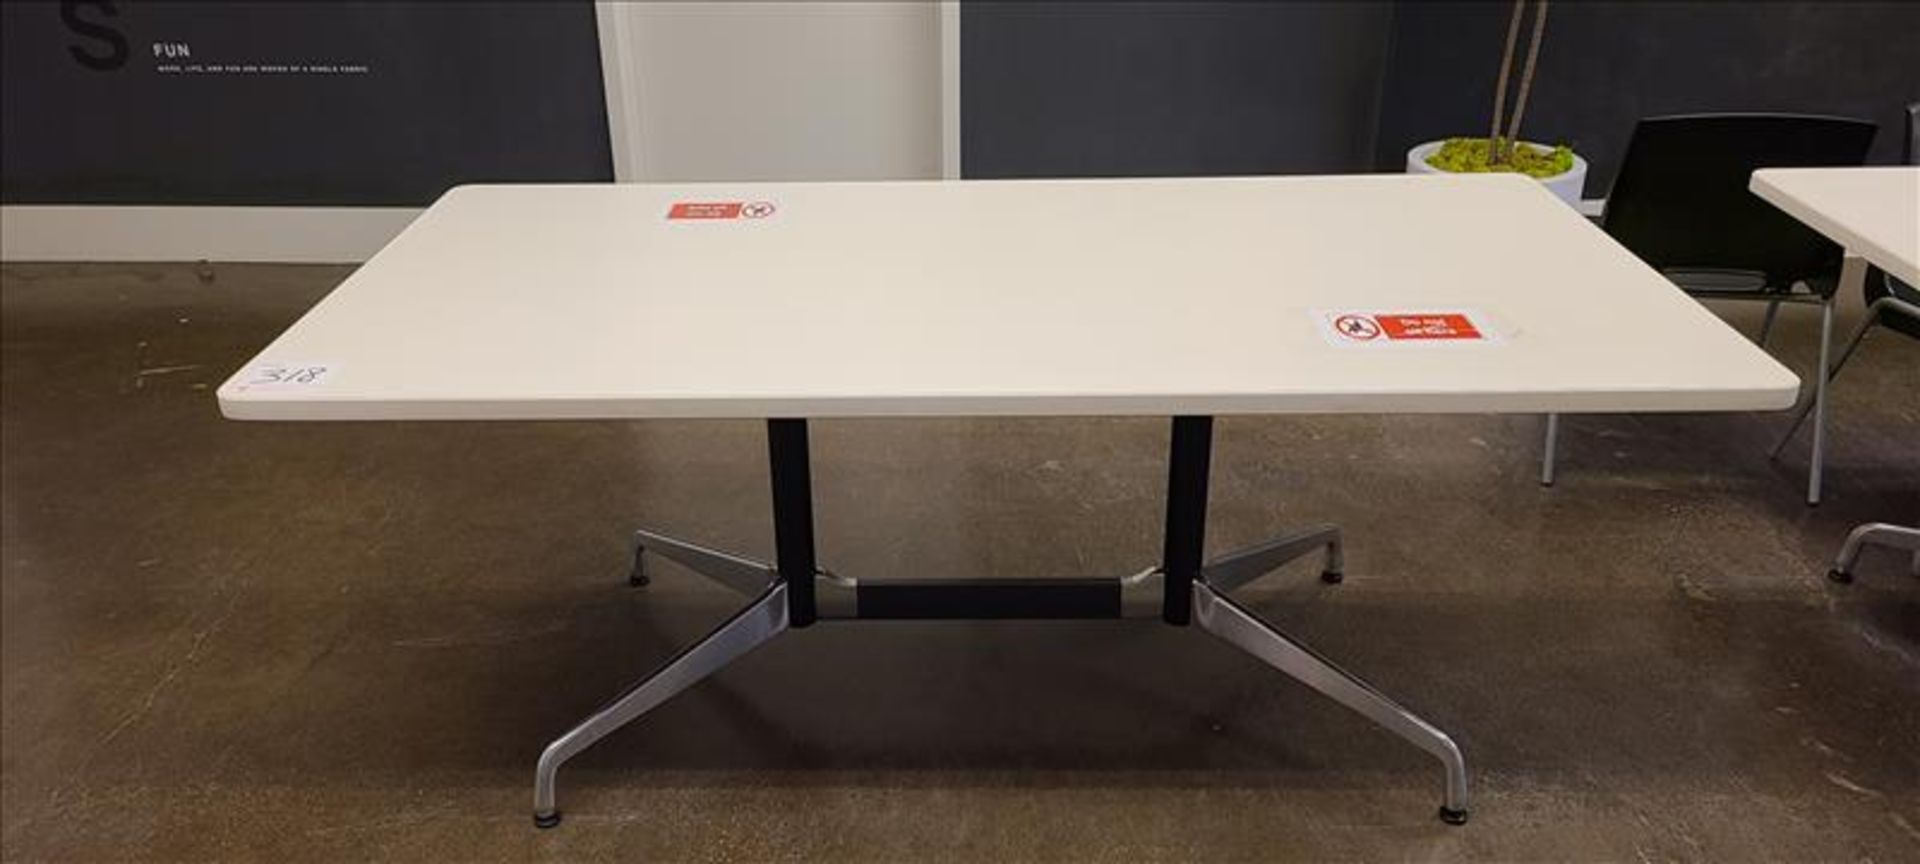 Lunchroom Table 72 in. x 36 in.